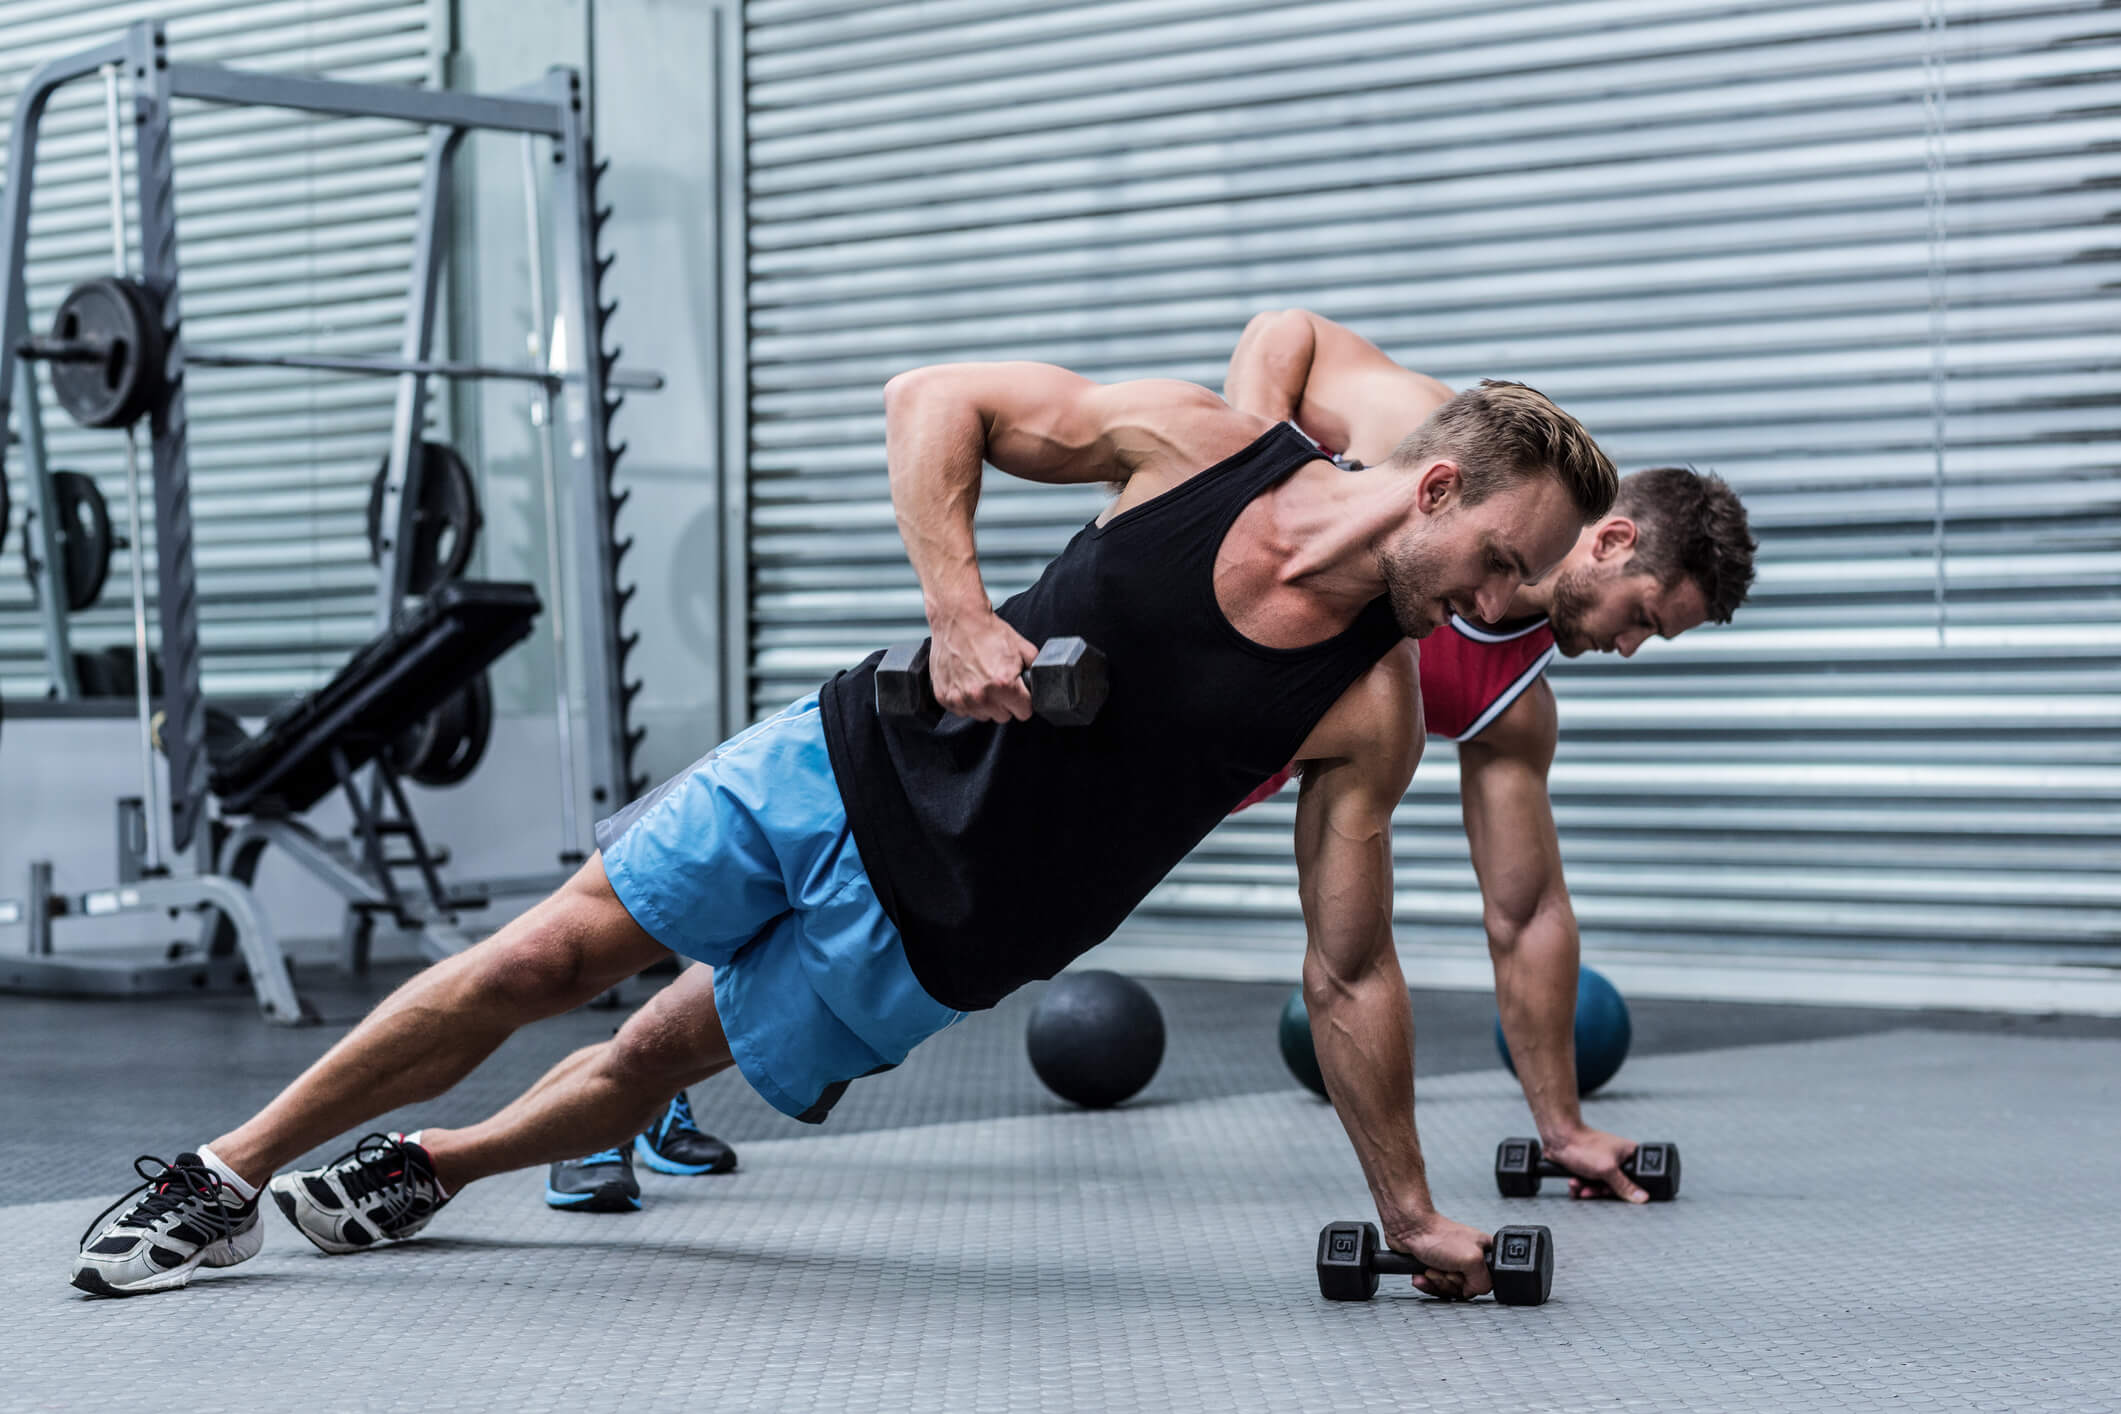 Muscular men doing a side plank while lifting a dumbbell